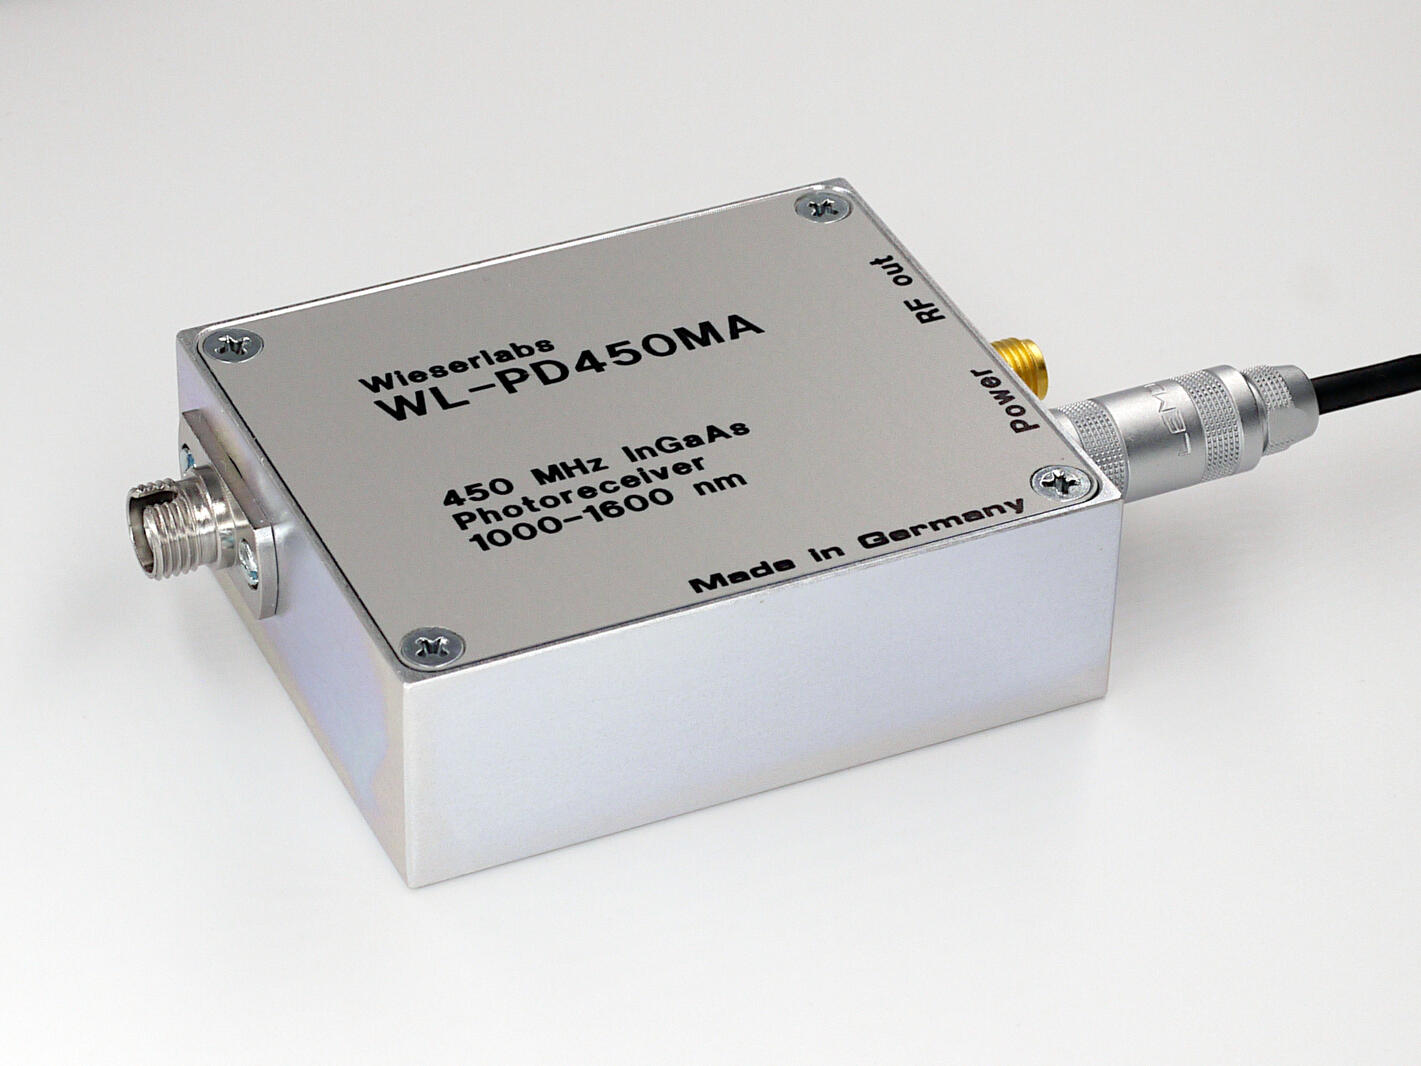 WL-PD450MA 450 MHz InGaAs Low Noise Photodetector